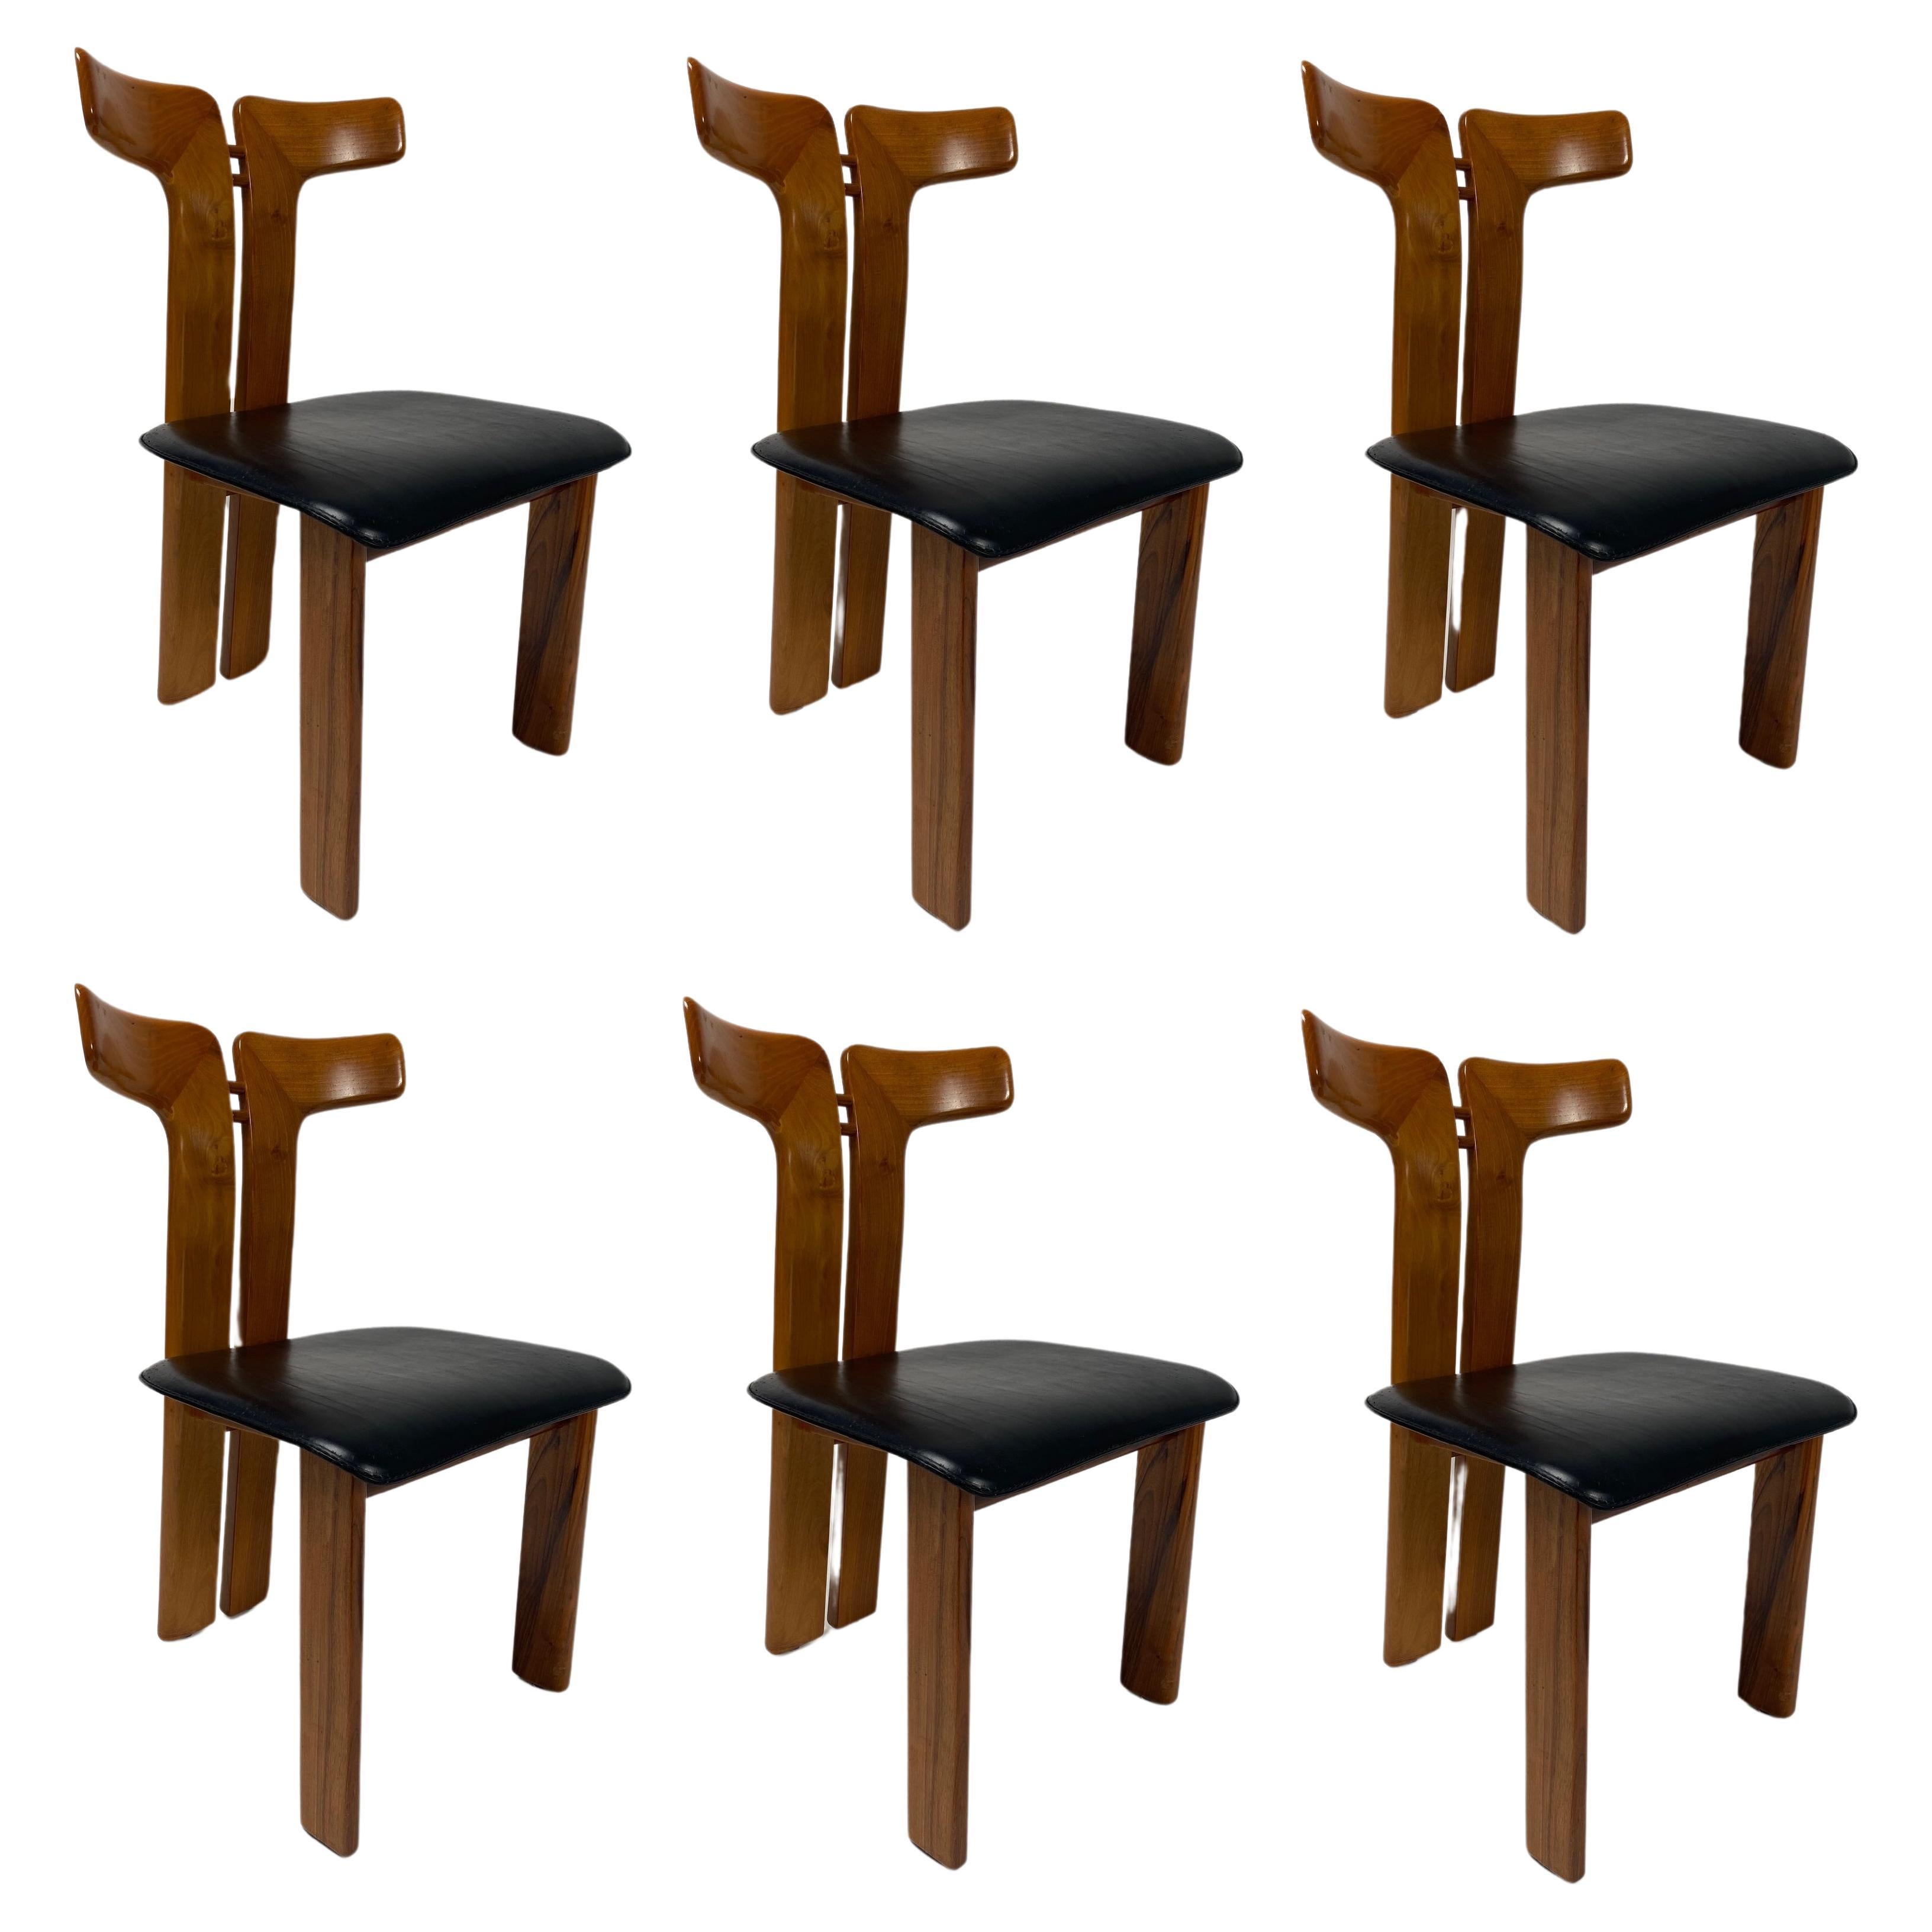 Pierre Cardin, 6 Dining Chairs in Walnut and Leather, 1970s For Sale